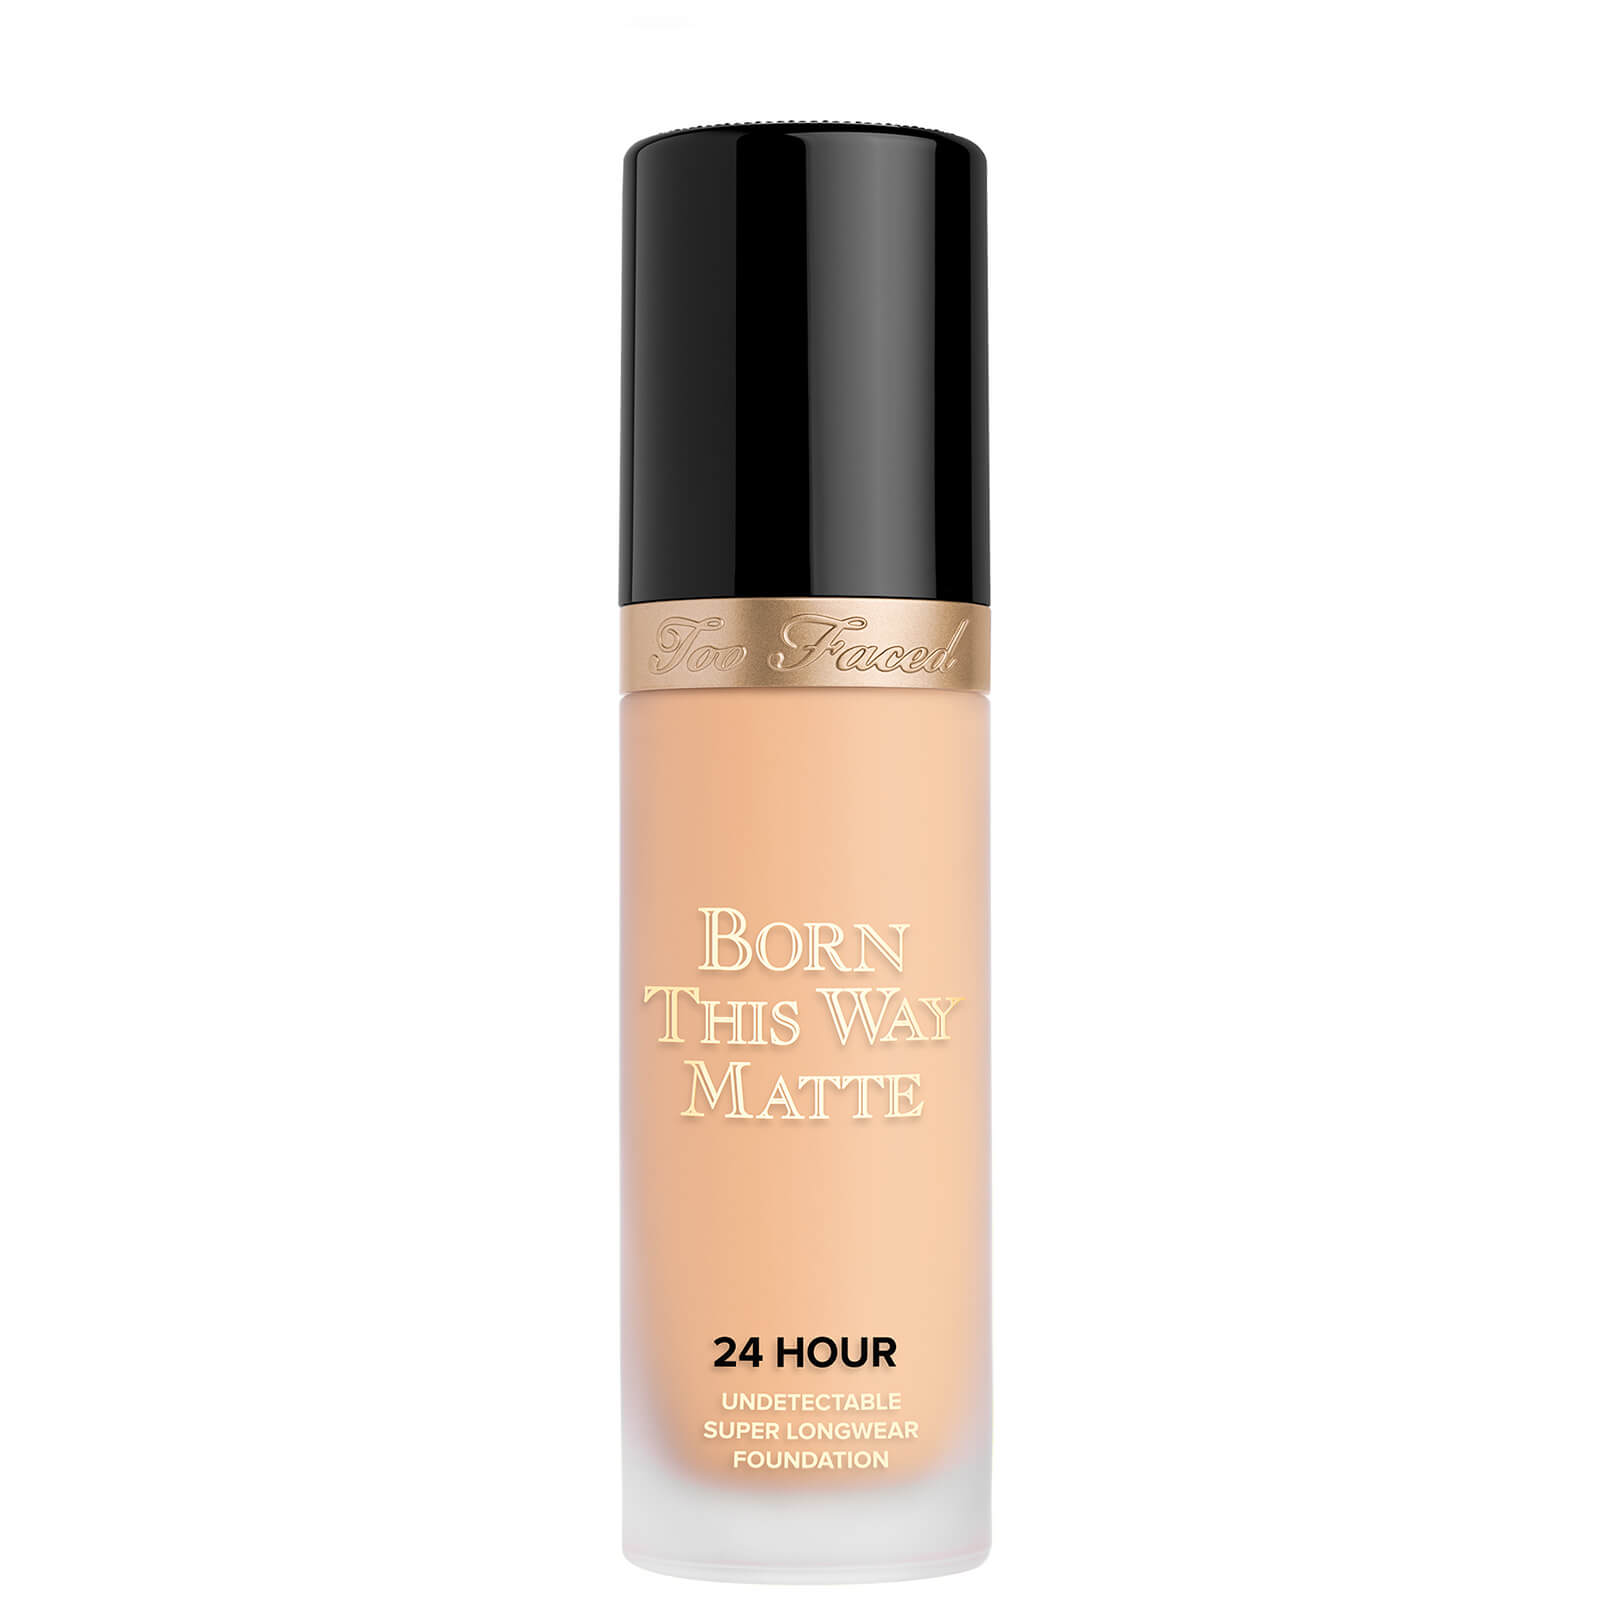 Too Faced Born This Way Matte 24 Hour Long-Wear Foundation 30ml (Various Shades) - Warm Nude